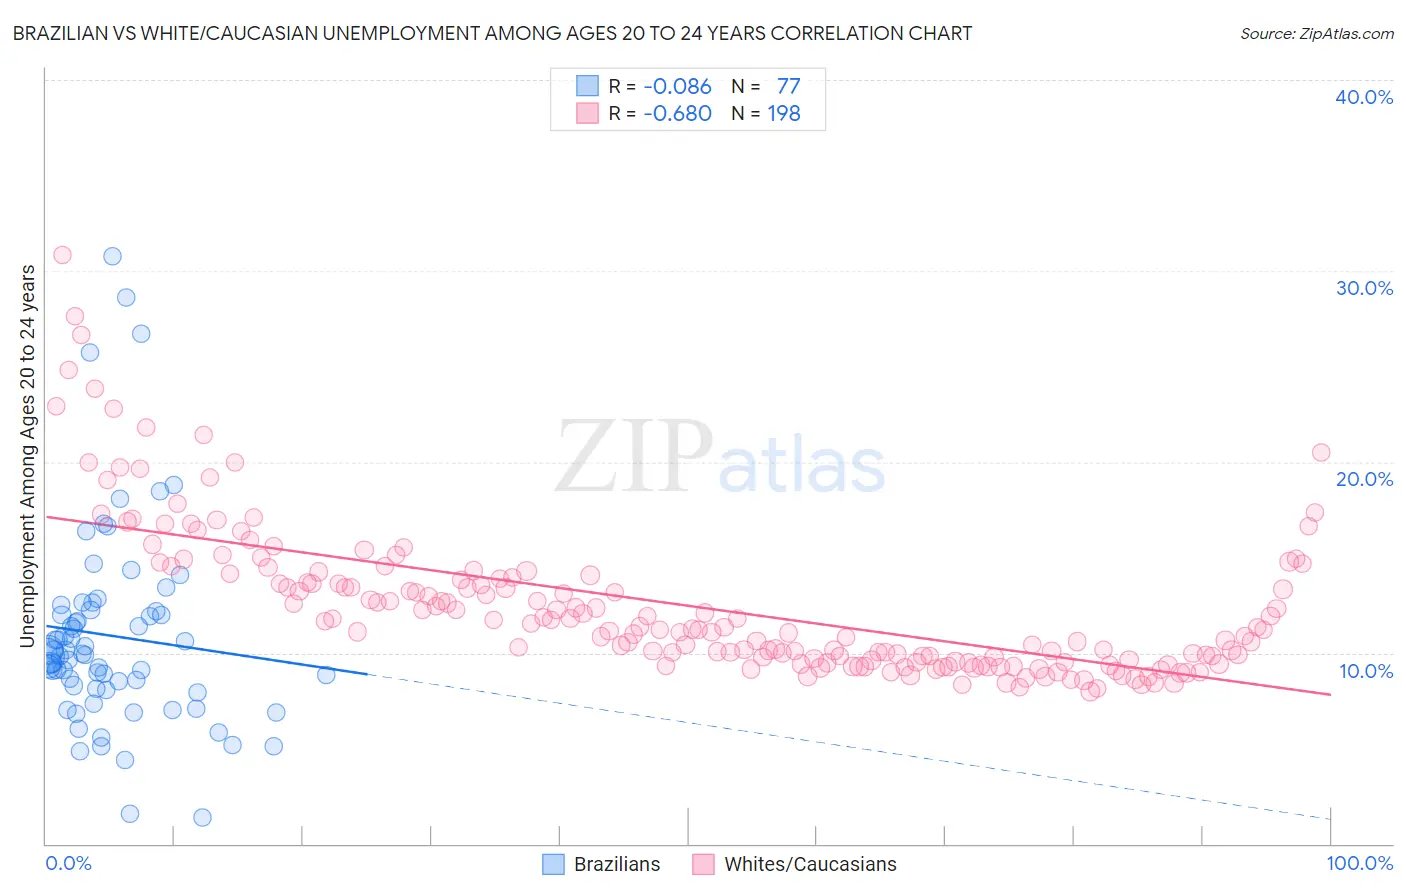 Brazilian vs White/Caucasian Unemployment Among Ages 20 to 24 years